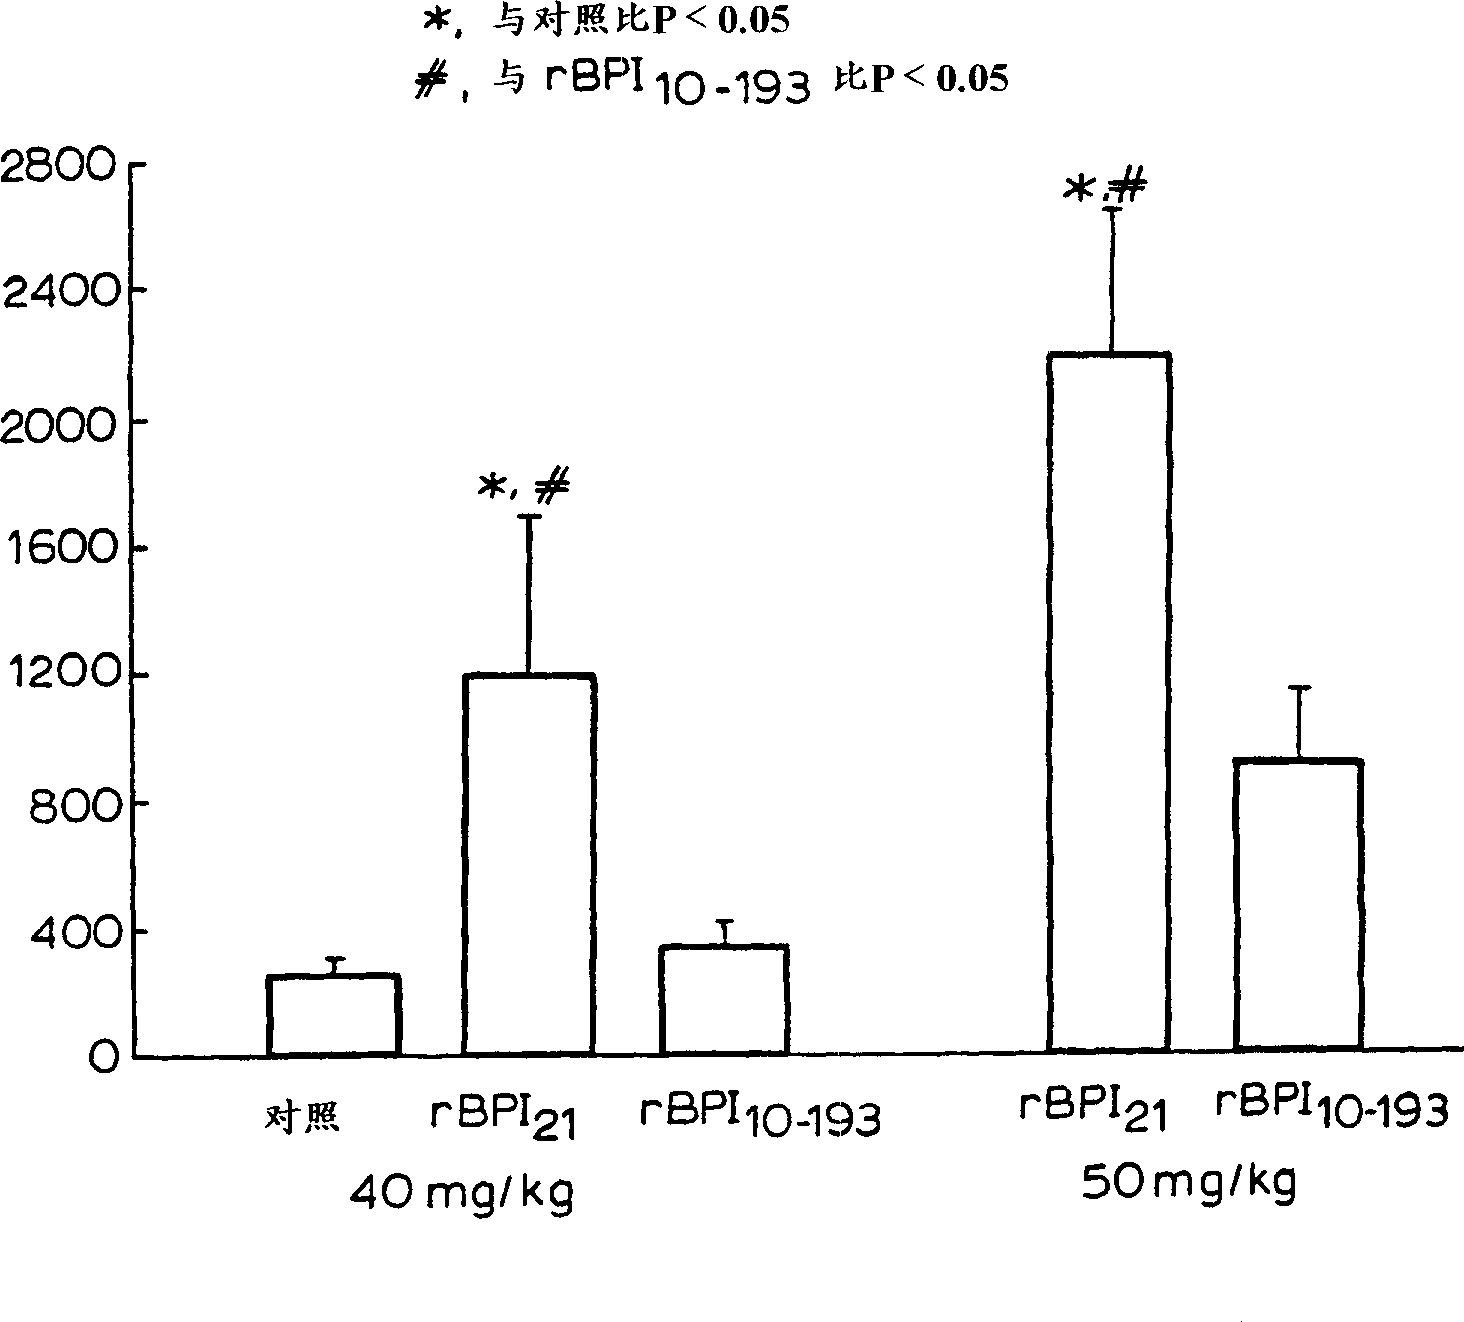 Bactericidal/permeability-increasing protein delation analogs